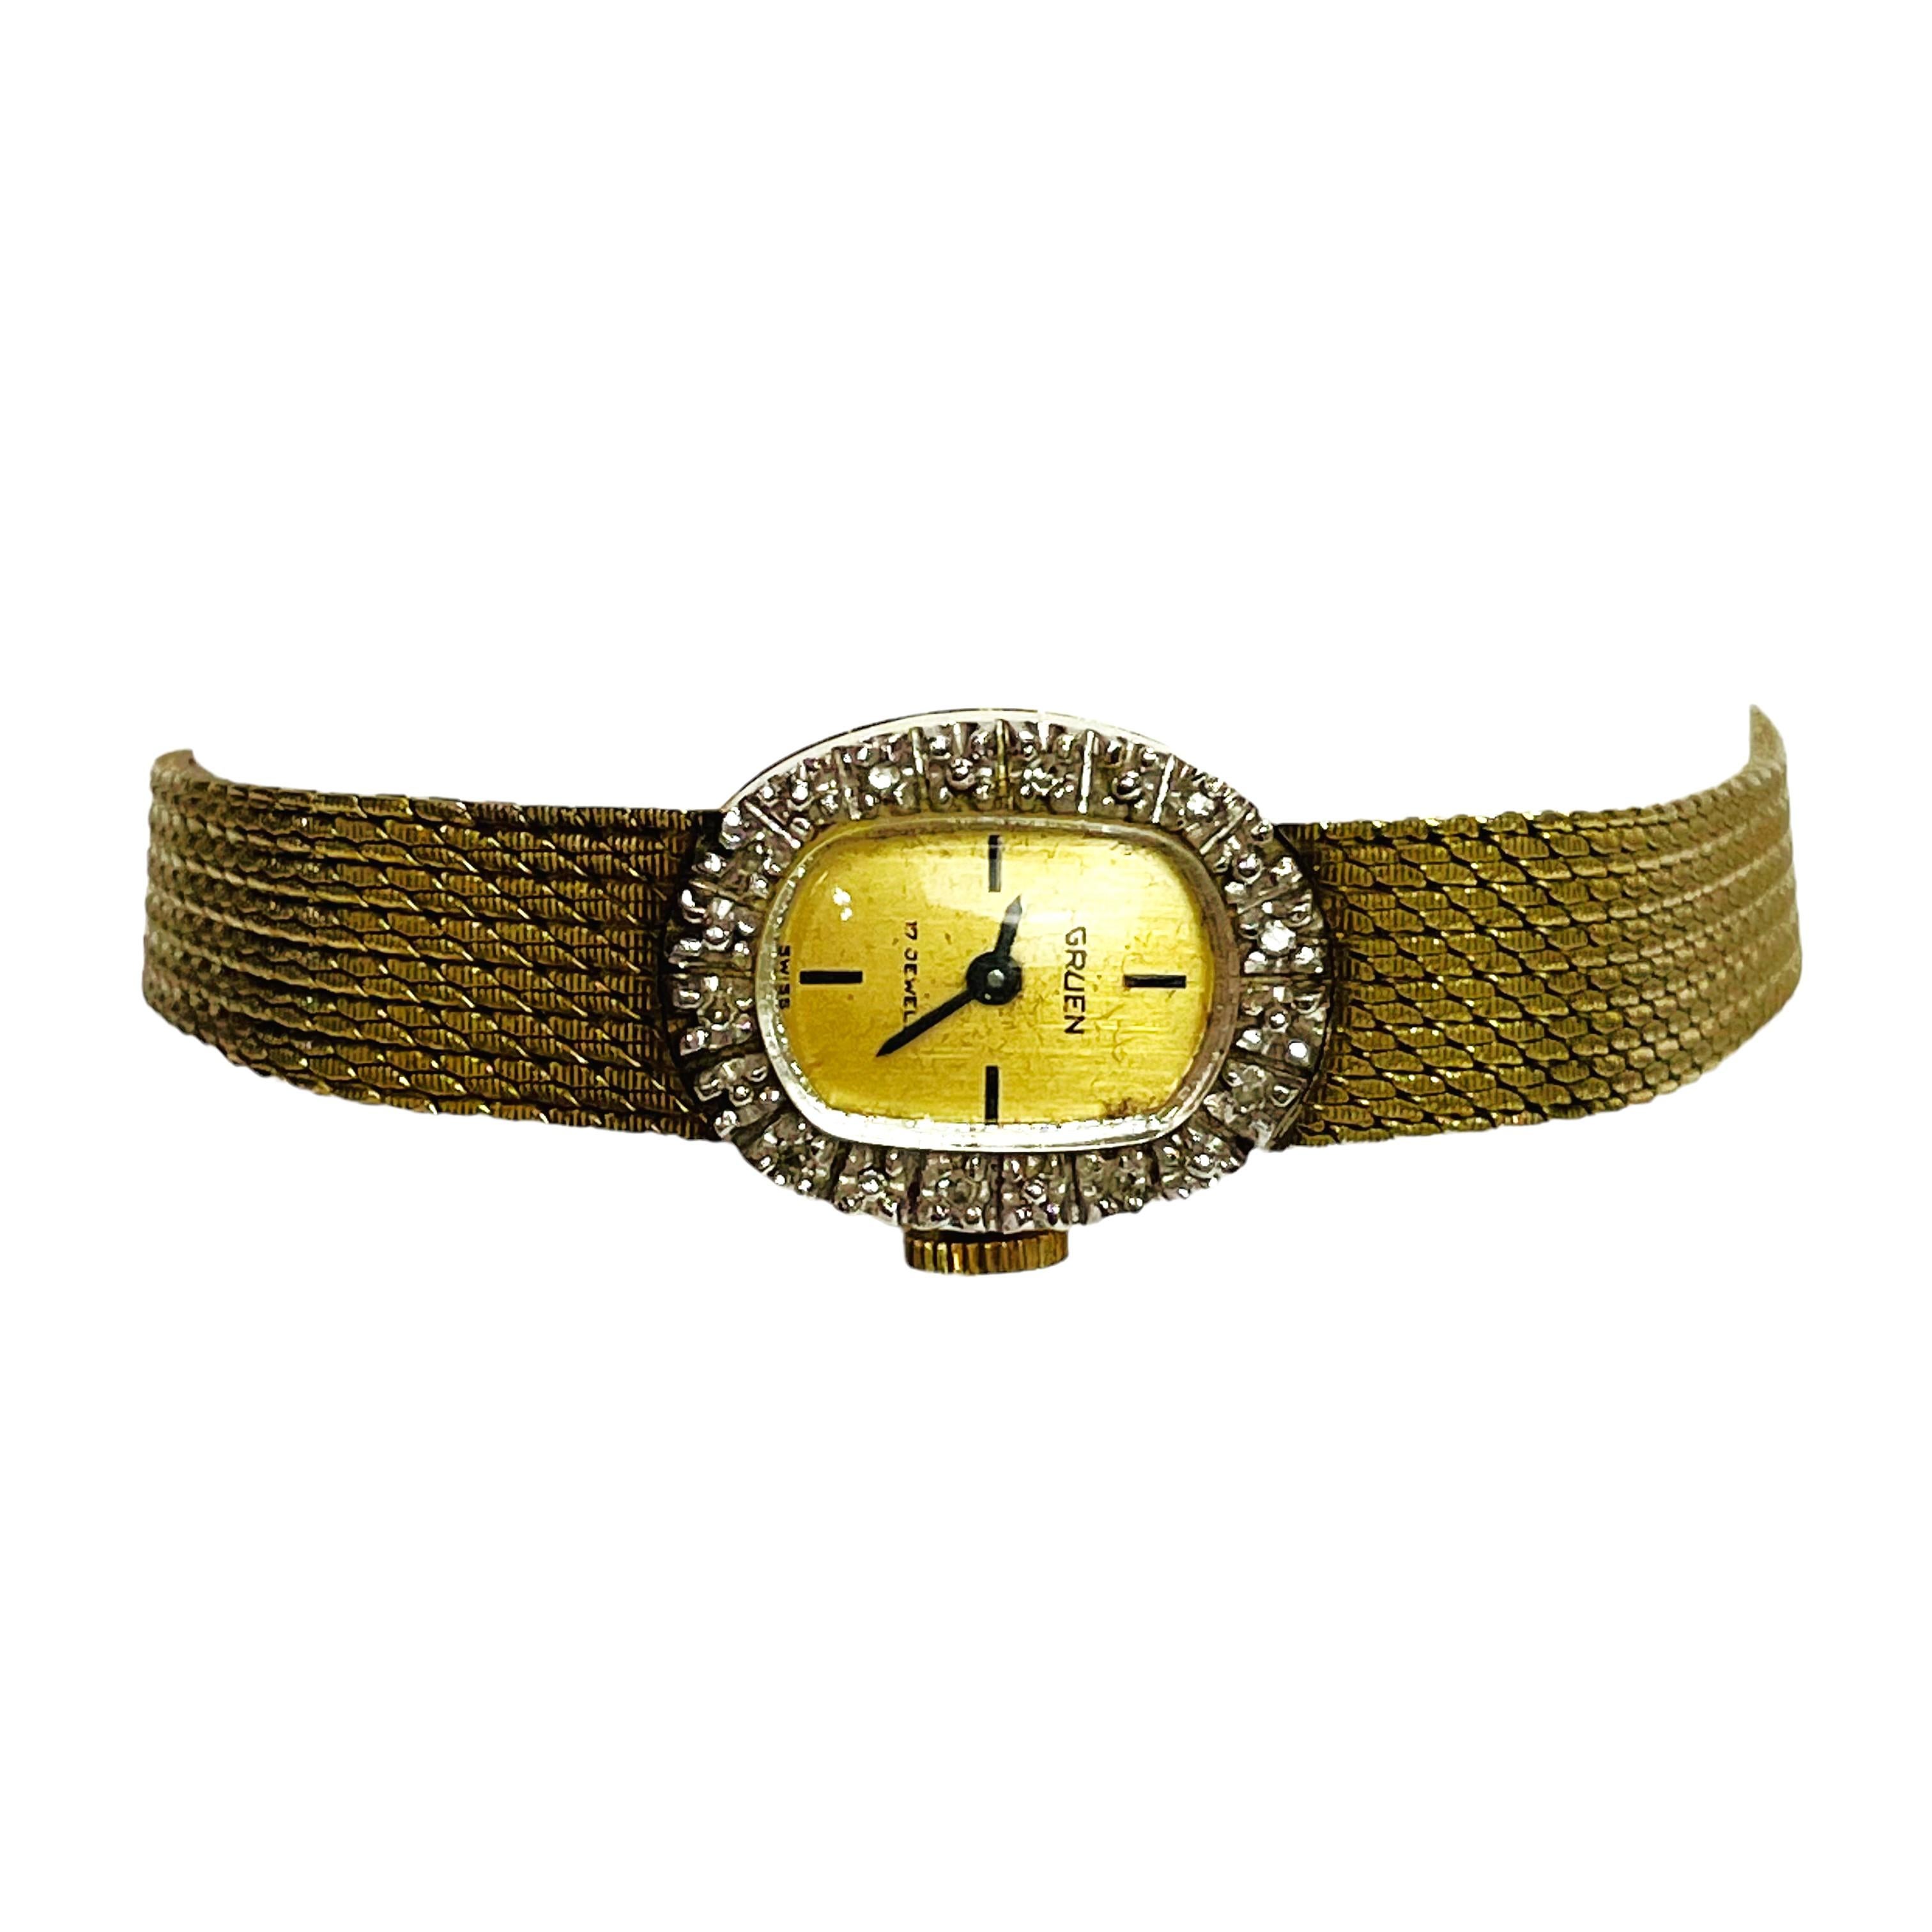 Woman's 14k Yellow Gold Italy 17 Jewel Watch with Diamonds. Watch has marks and scratches on it from being worn and used, overall sapphire crystal is fully clear and watch runs as it should.   Features 14k Yellow Gold Case and 10K Gold Filled Band.